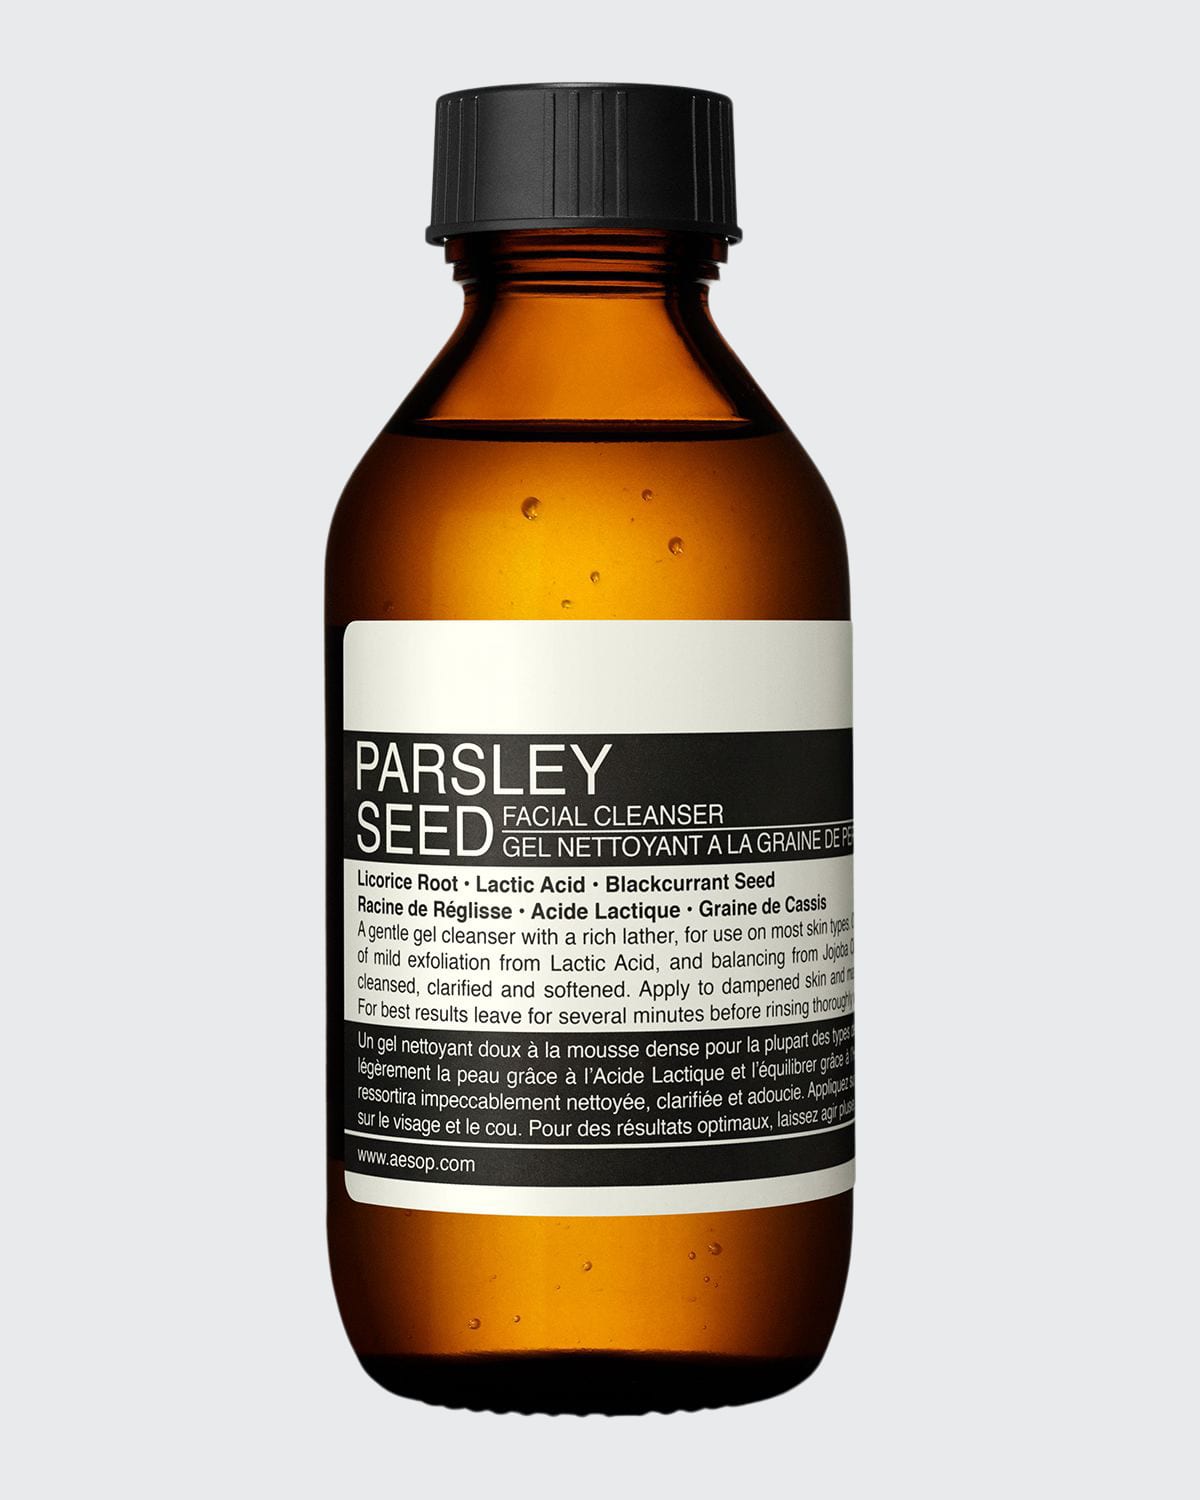 Parsley Seed Face Cleanser, 3.4 oz.